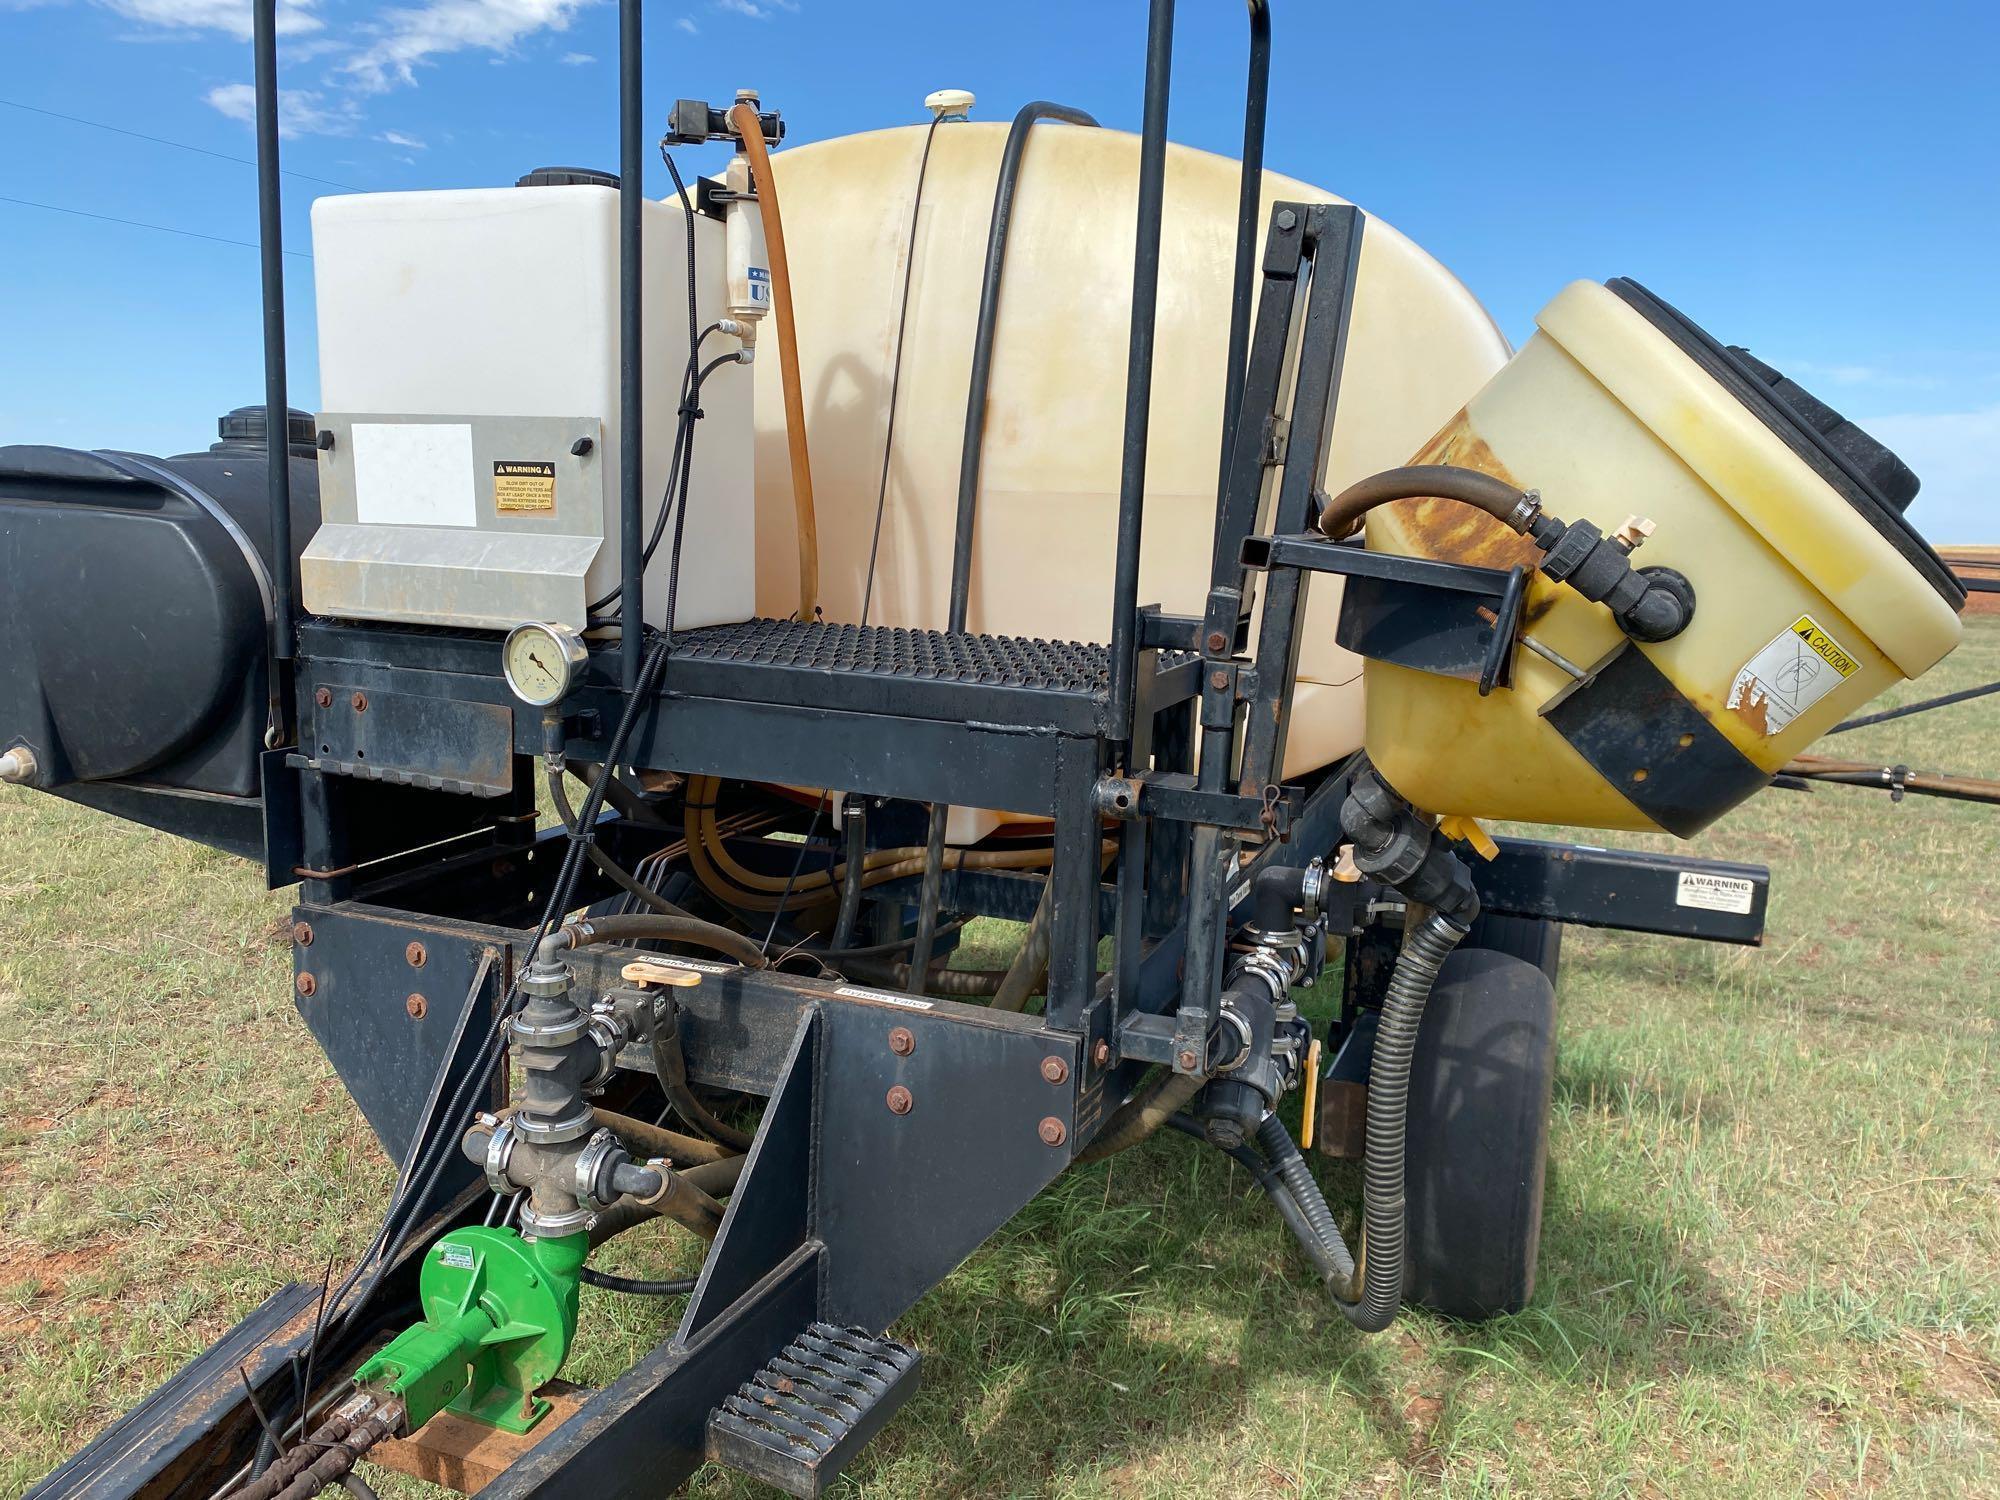 WYLIE 45' SPRAYER, 1,000 GALLON POLY TANK HYD. PUMP, TA FLOATING AXLE, WITH RAVEN 440 MONITOR